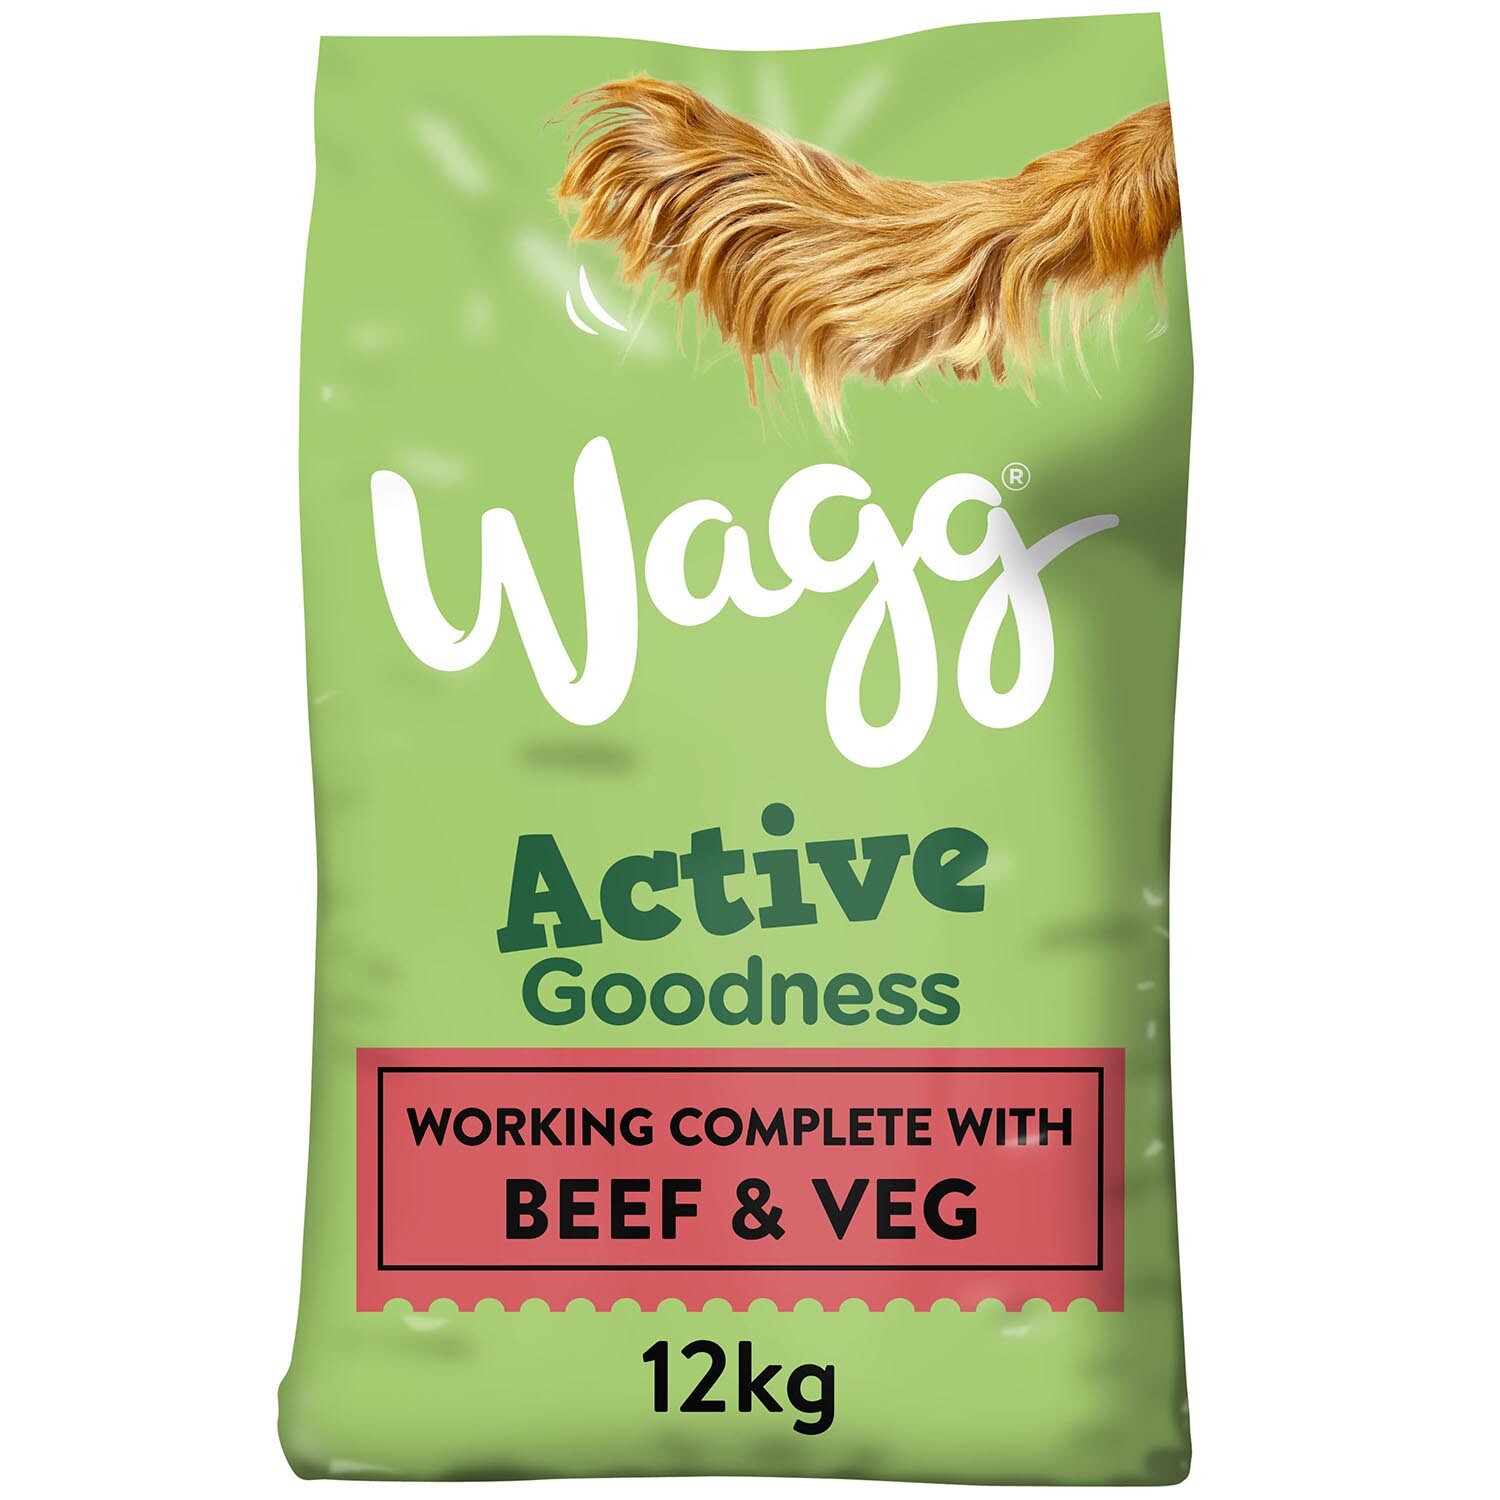 Wagg Active Goodness Dry Dog Food Beef and Veg 12kg Image